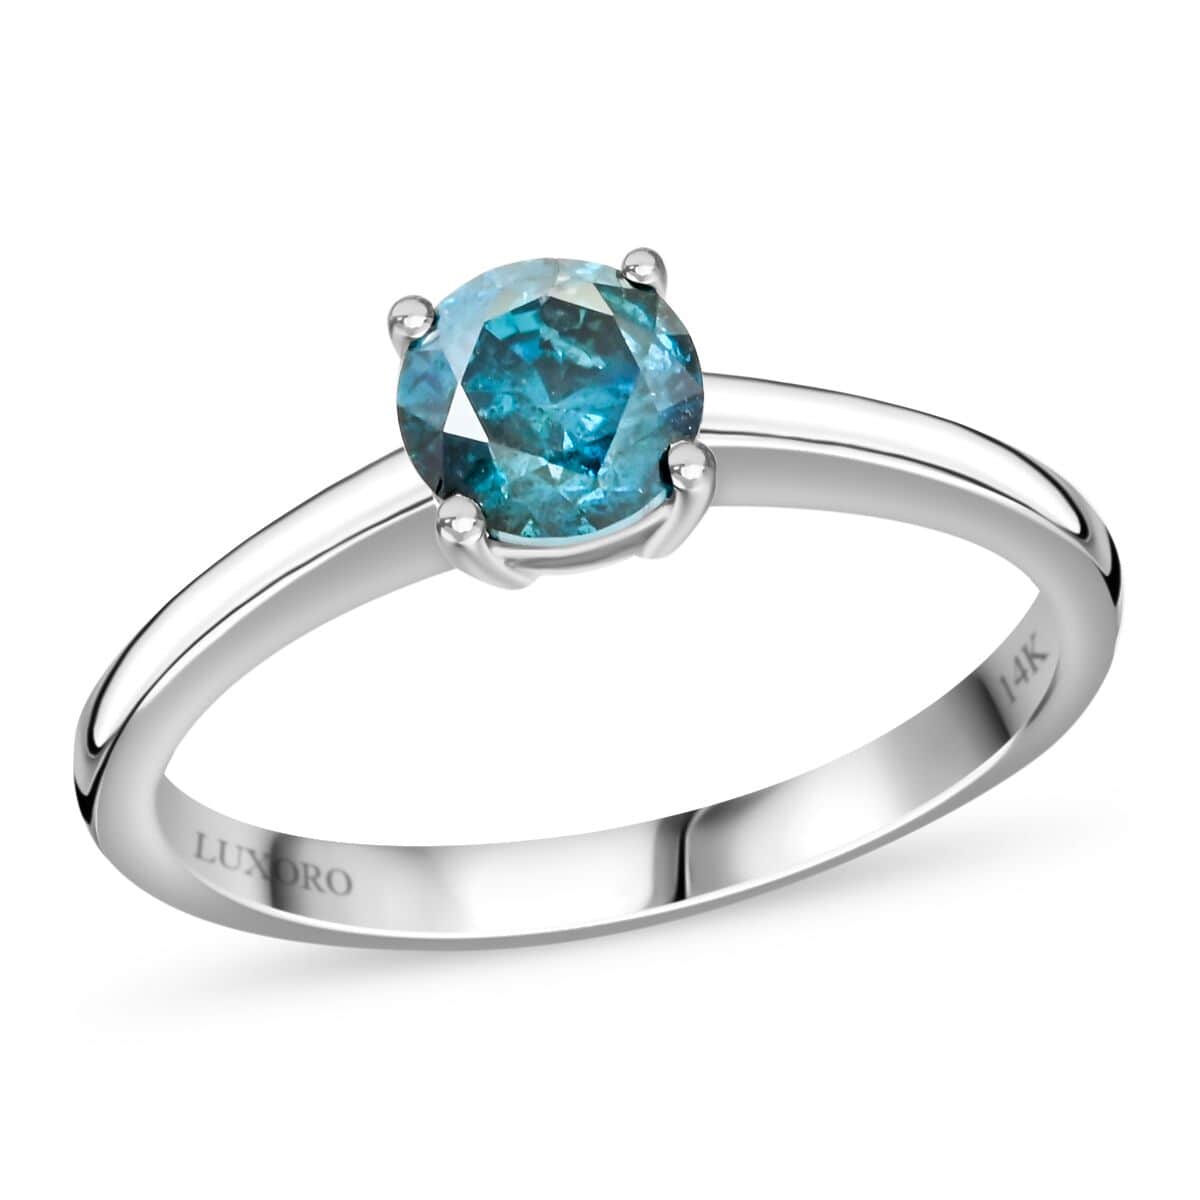 Luxoro 14K White Gold Venice Blue Diamond I1-I2 Solitaire Ring (Size 7.0) 1.00 ctw image number 0